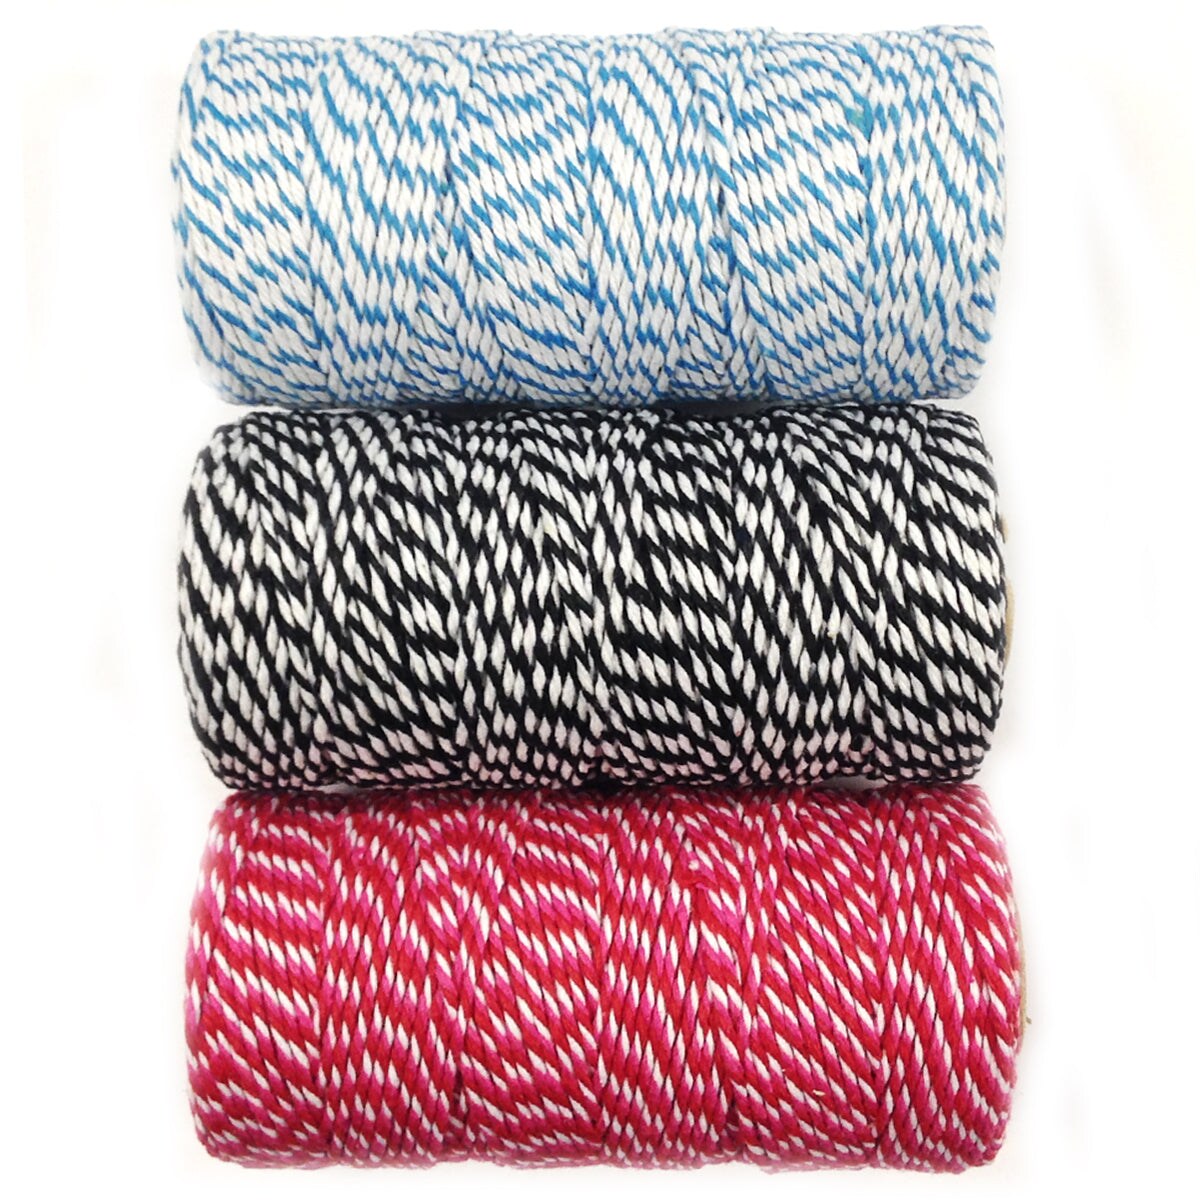 Wrapables Cotton Baker&#x27;s Twine 12ply 330 Yards (Set of 3 Spools x 110 Yards) for Gift Wrapping, Party Decor, and Arts and Crafts (Blue, Black, Red &#x26; Hot Pink)